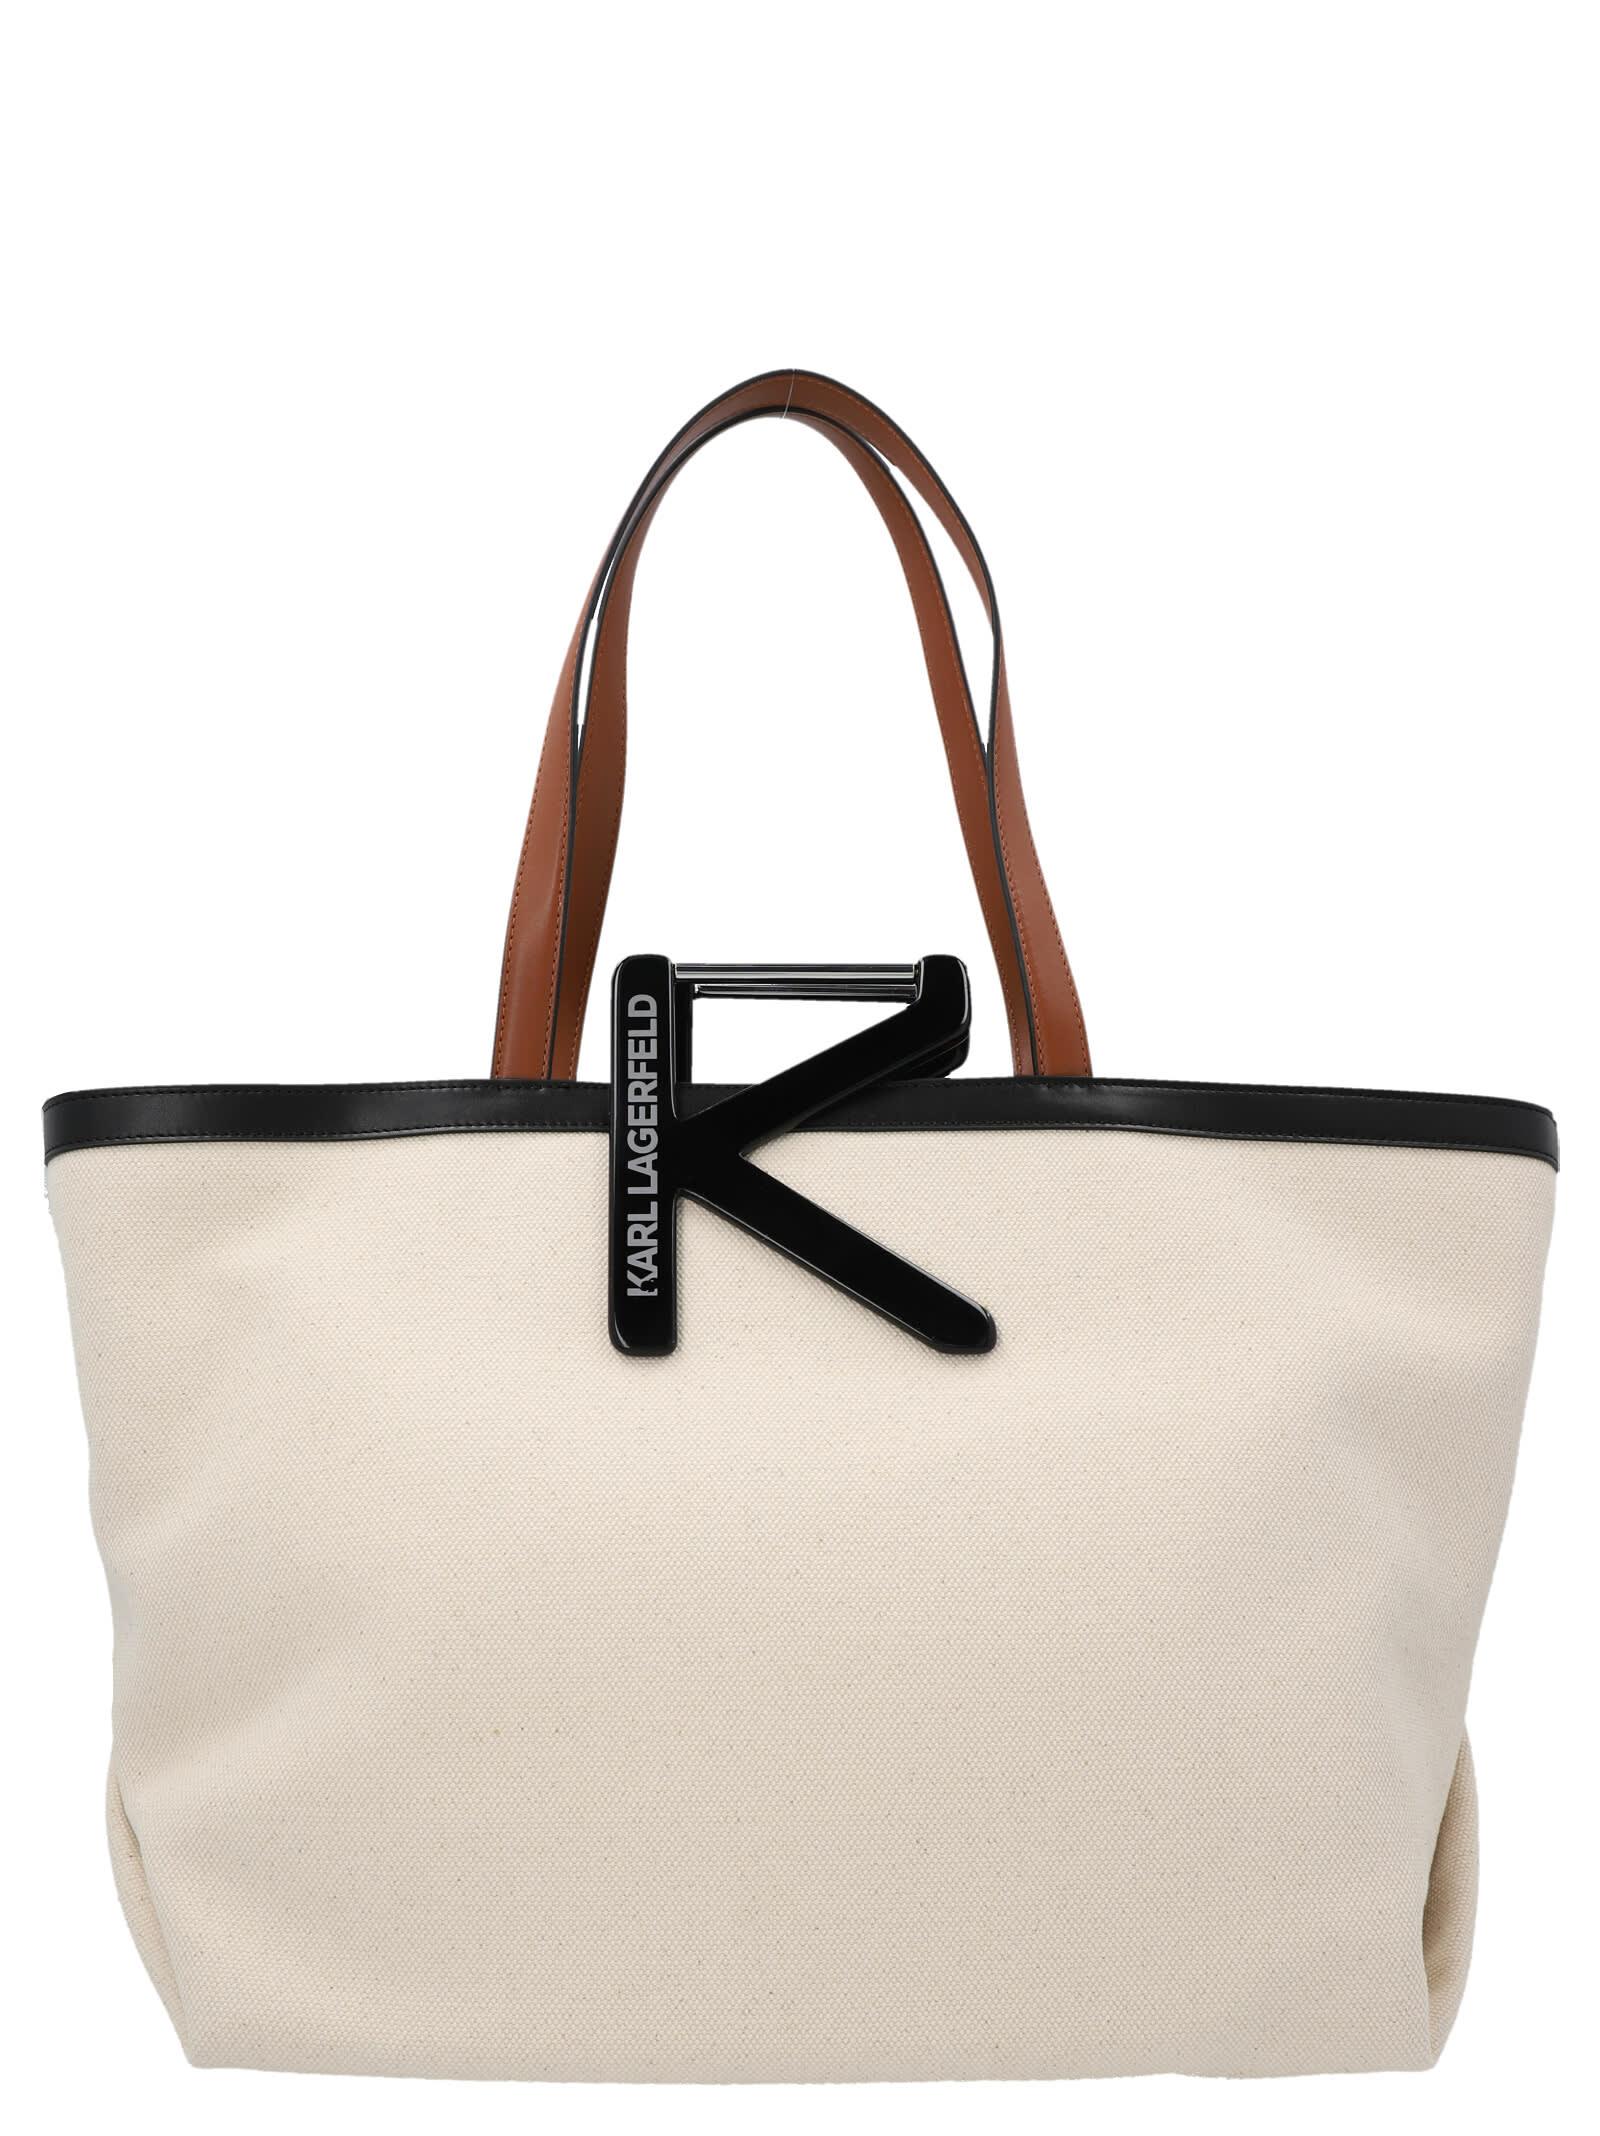 Karl Lagerfeld Canvas K/karl Shopping Bag in Beige (Natural) - Save 19% |  Lyst